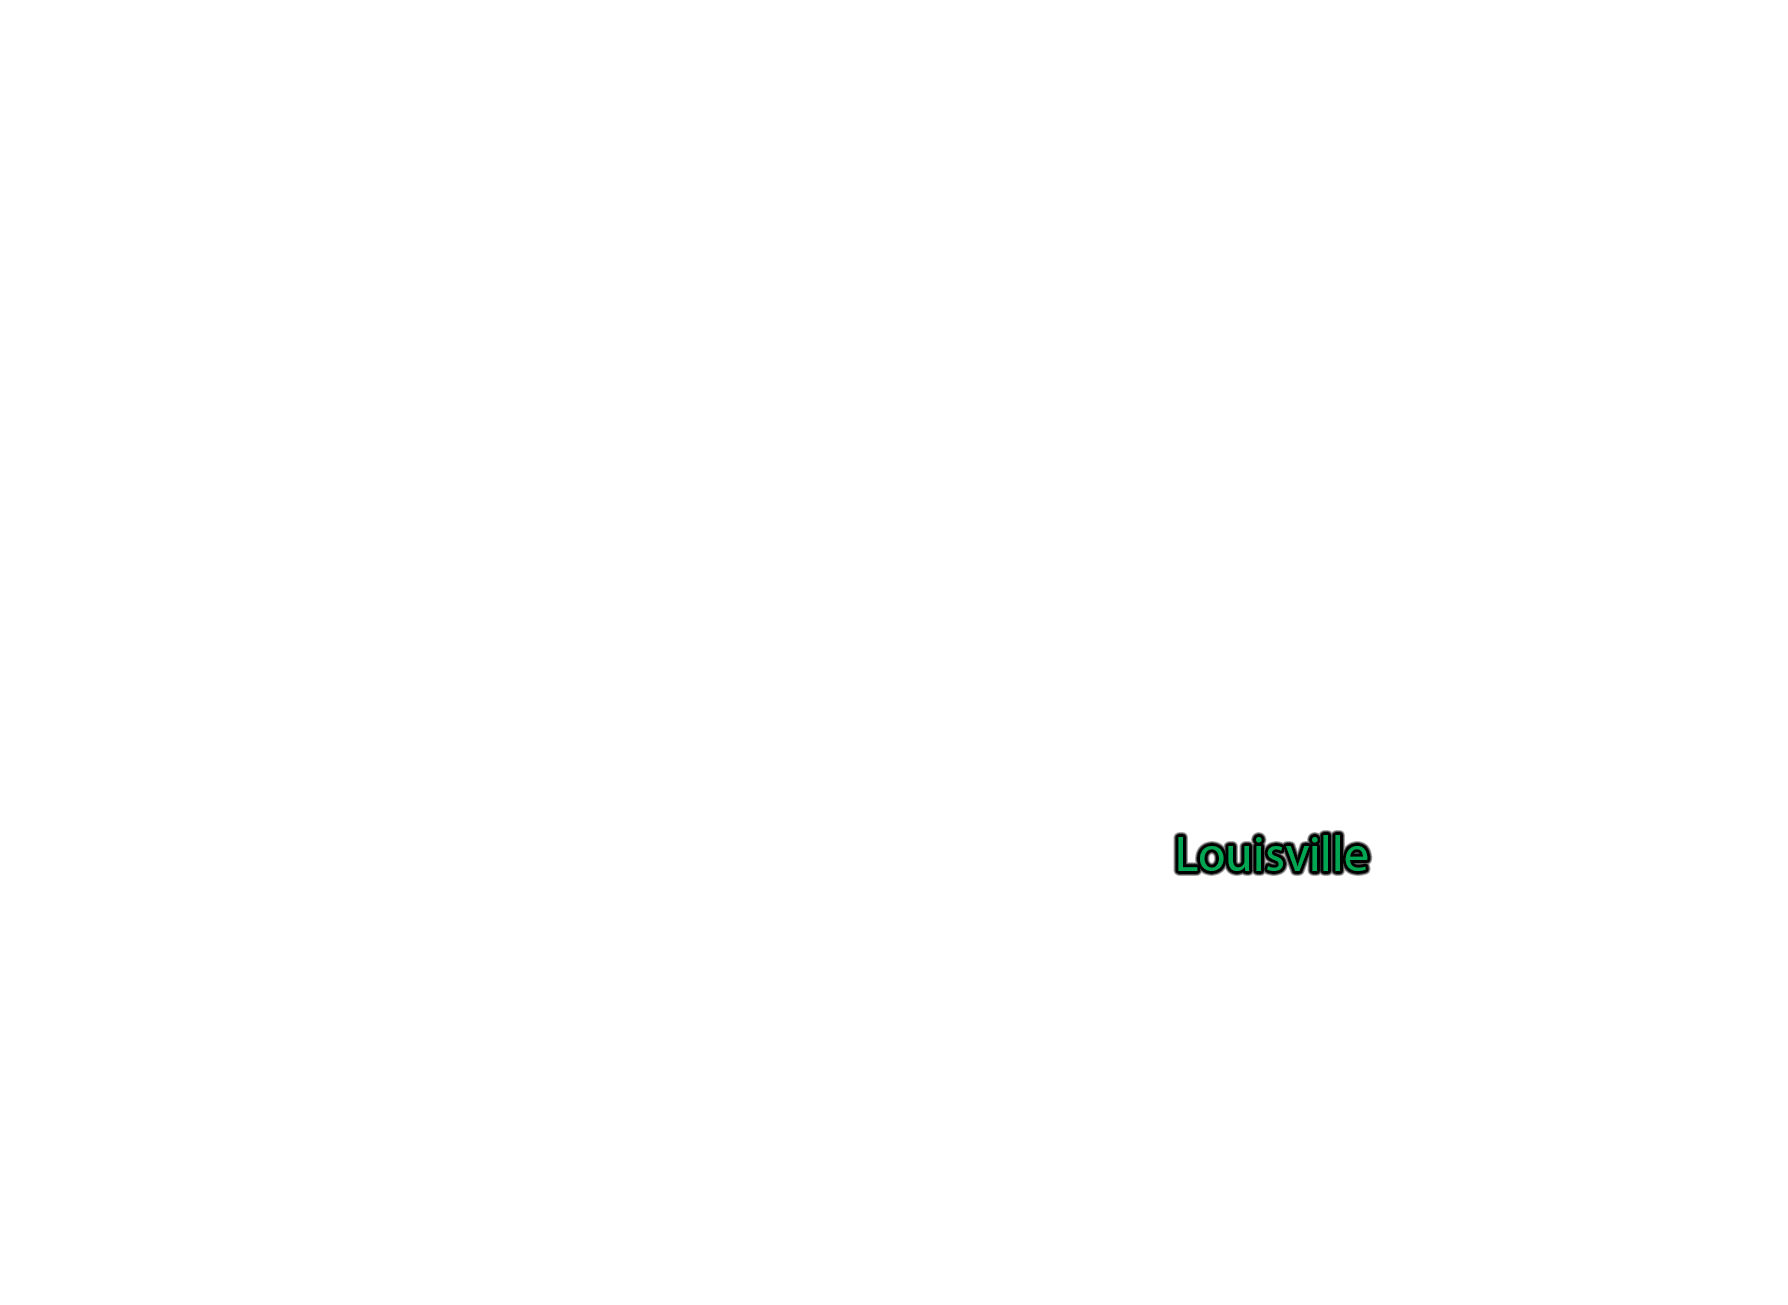 Louisville label with glow